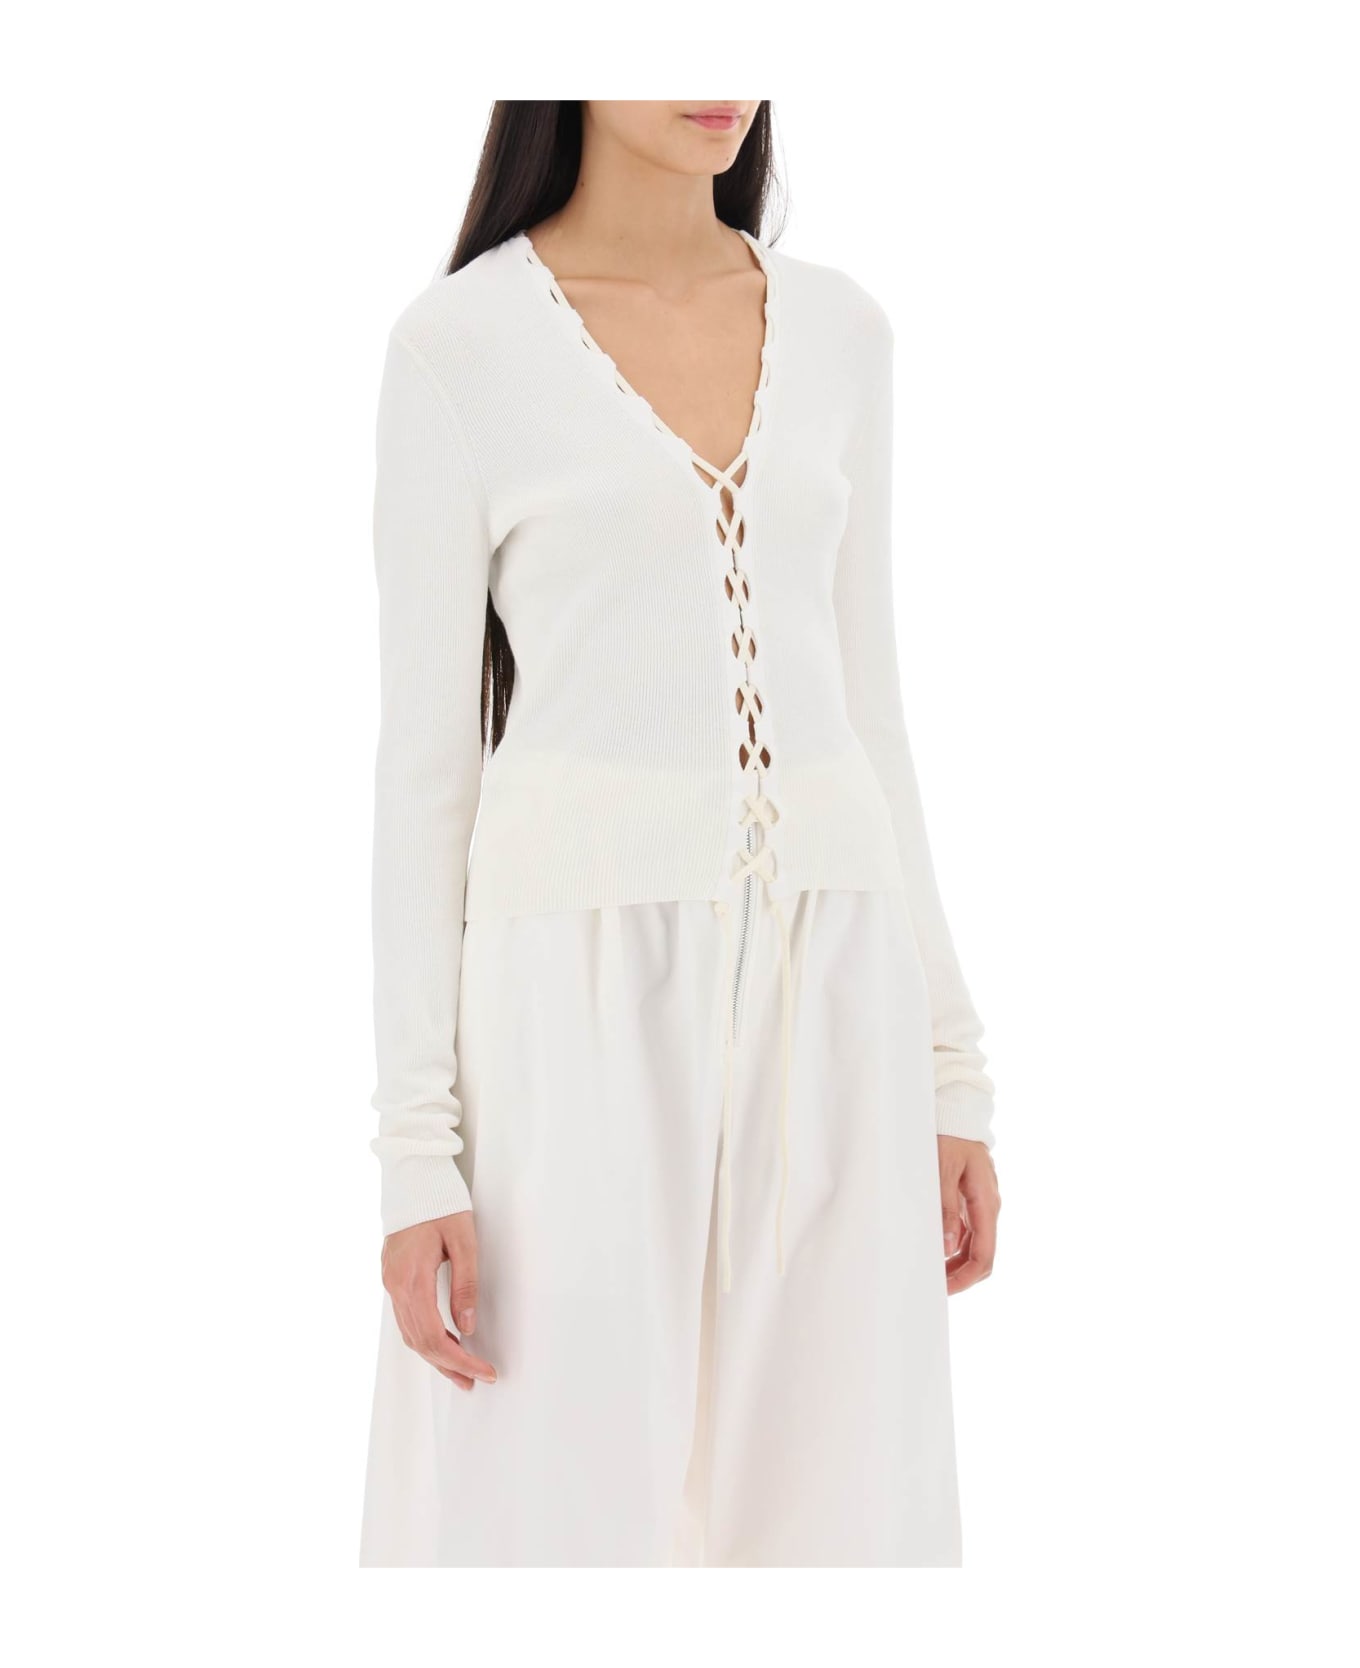 Dion Lee Lace-up Cardigan - WHITE CREAM (White) カーディガン